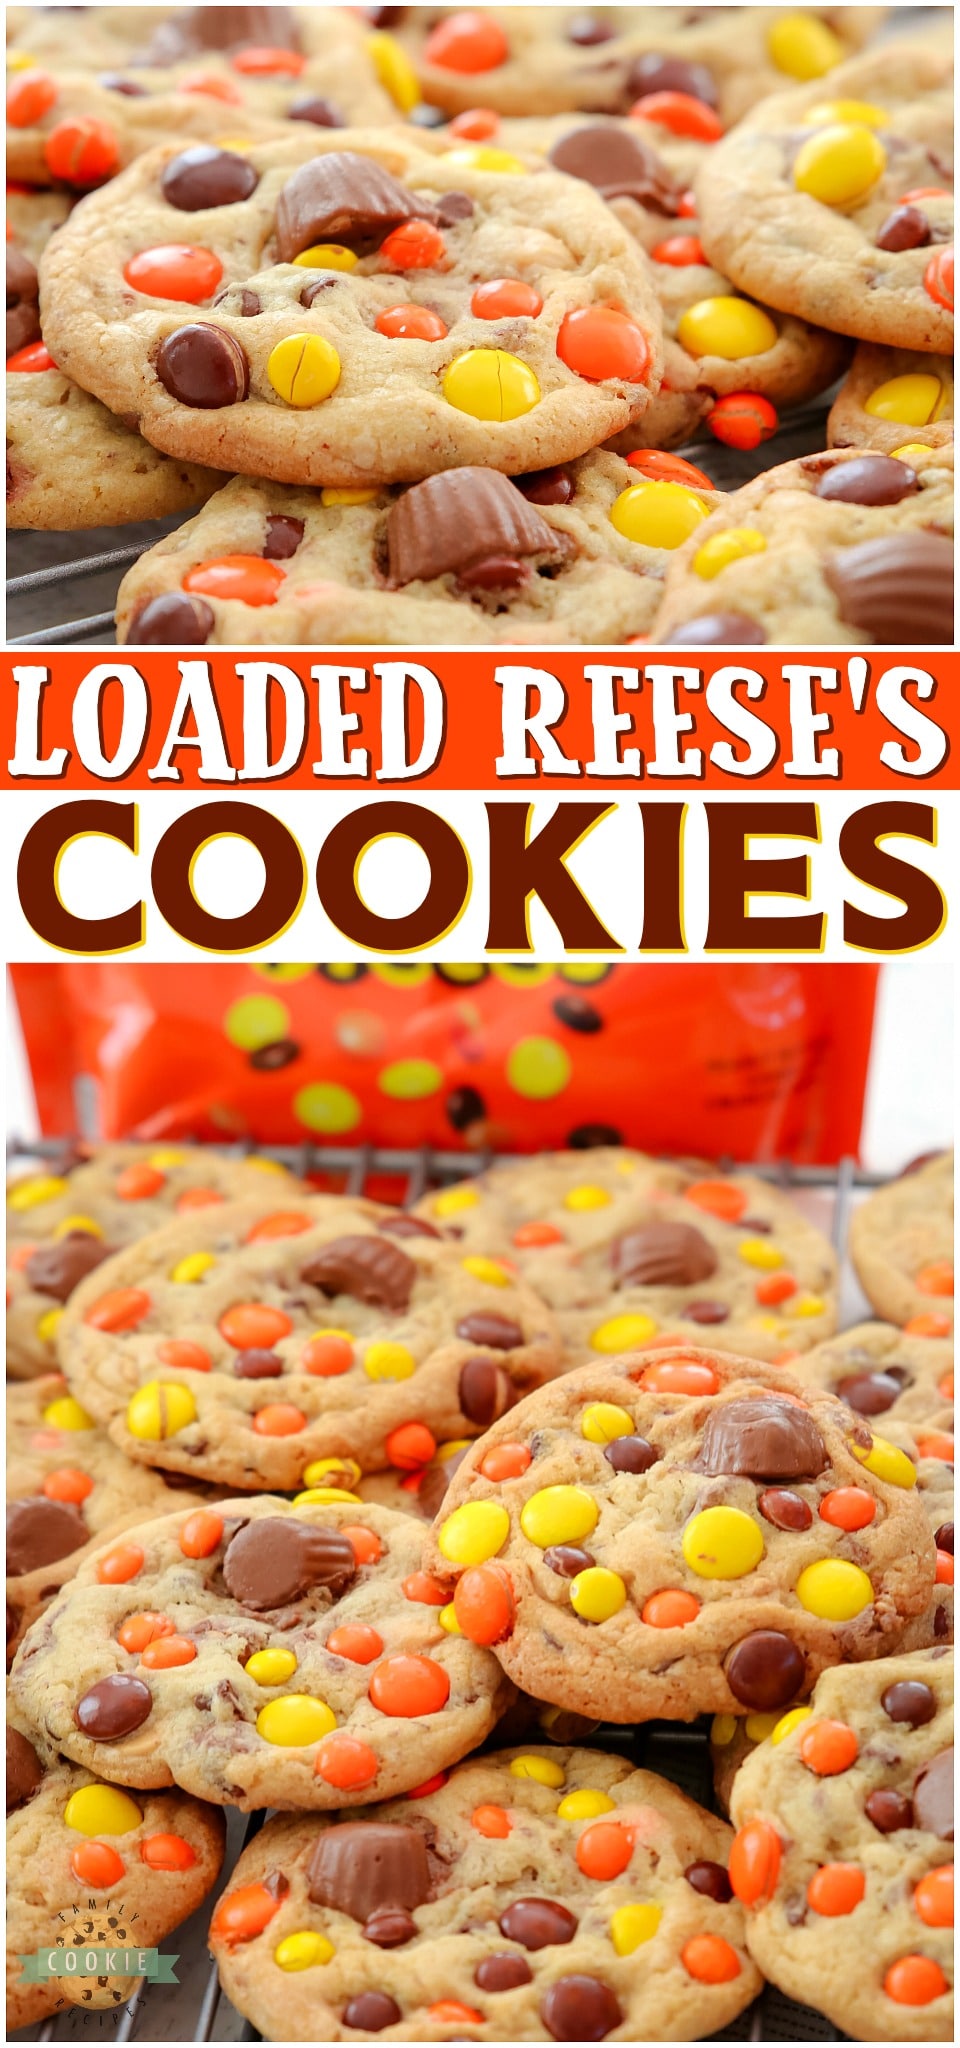 Loaded Reese's Pieces Cookies PERFECT for Reese's Peanut Butter Cup lovers! Soft & buttery cookies packed with Reese's Pieces & topped with mini PB cups for an over-the-top Reese's dessert!